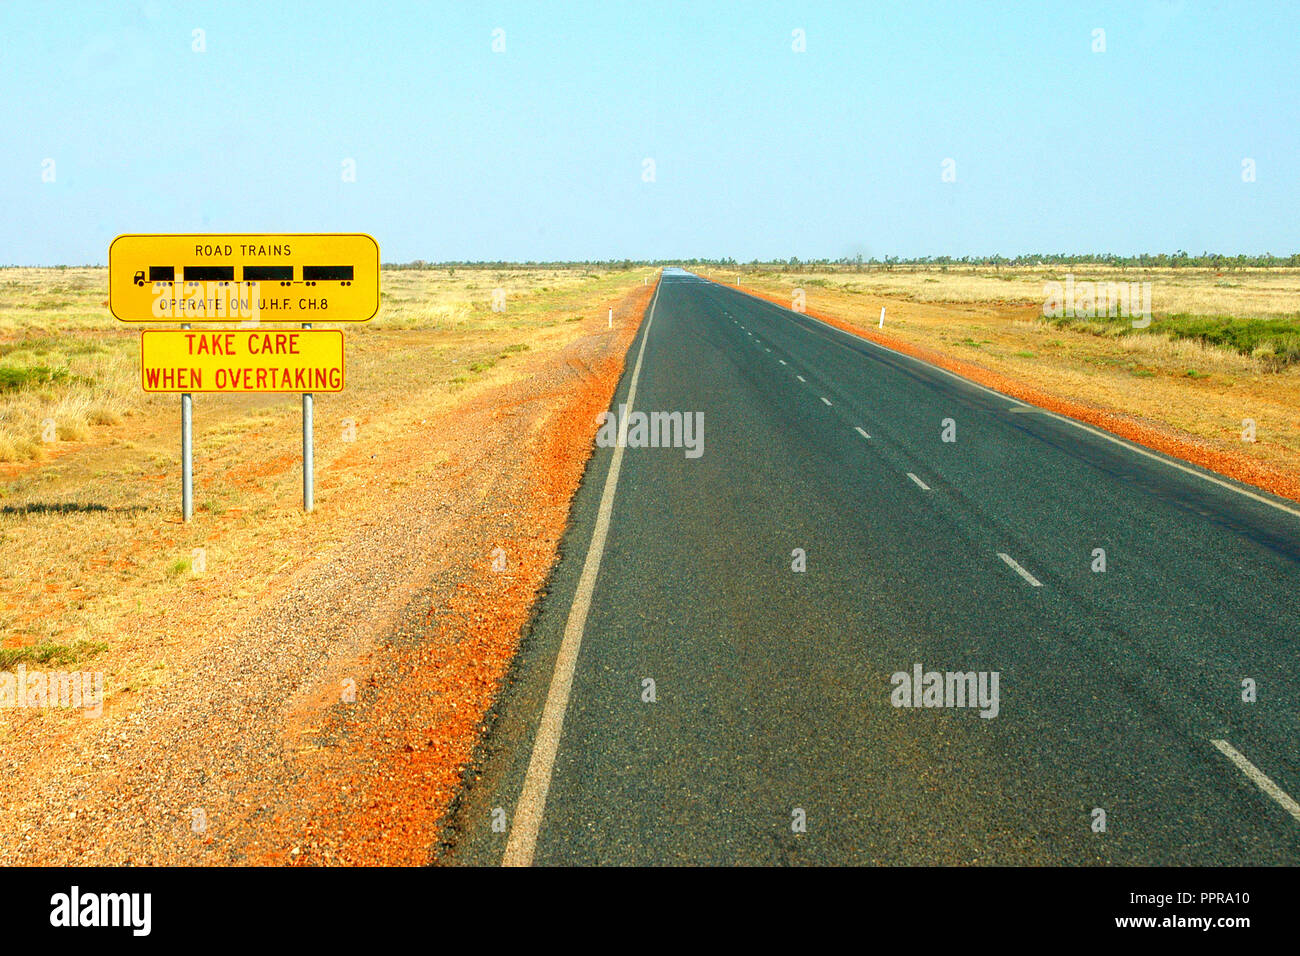 ROAD TRAIN SIGN, TAKE CARE WHEN OVERTAKING, OUTBACK HIGHWAY, WESTERN AUSTRALIA Stock Photo